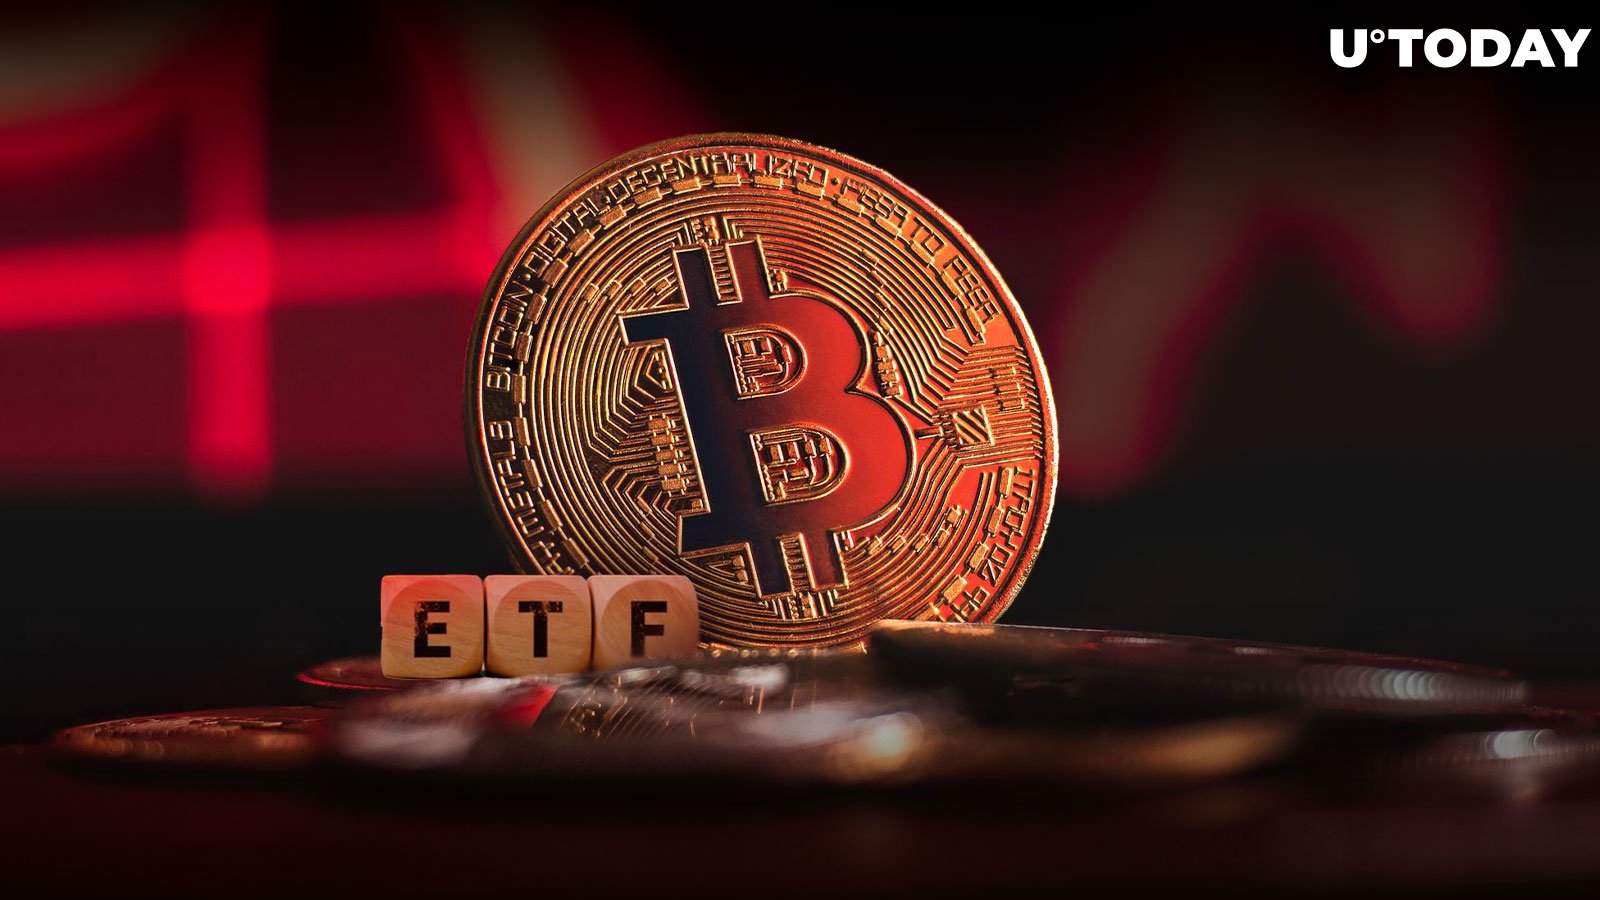 Inflows vs Outflows: Will Bitcoin ETFs Lose Momentum?